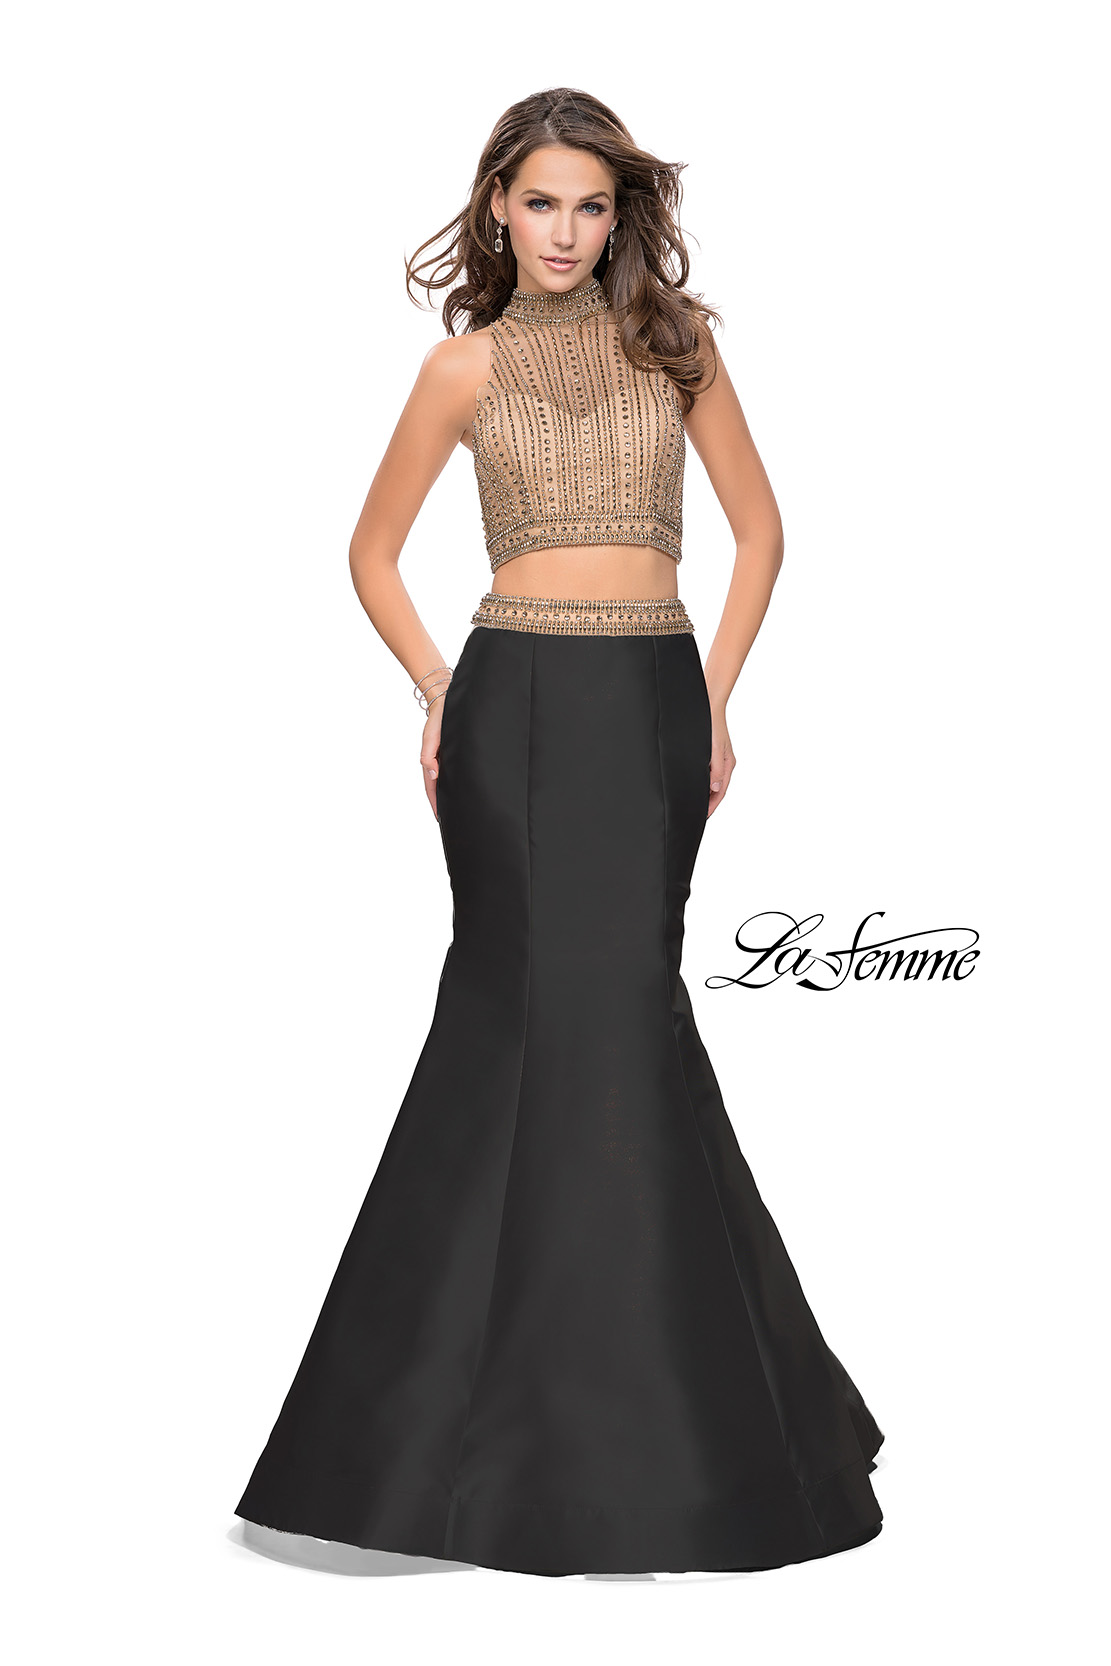 black and gold two piece prom dress